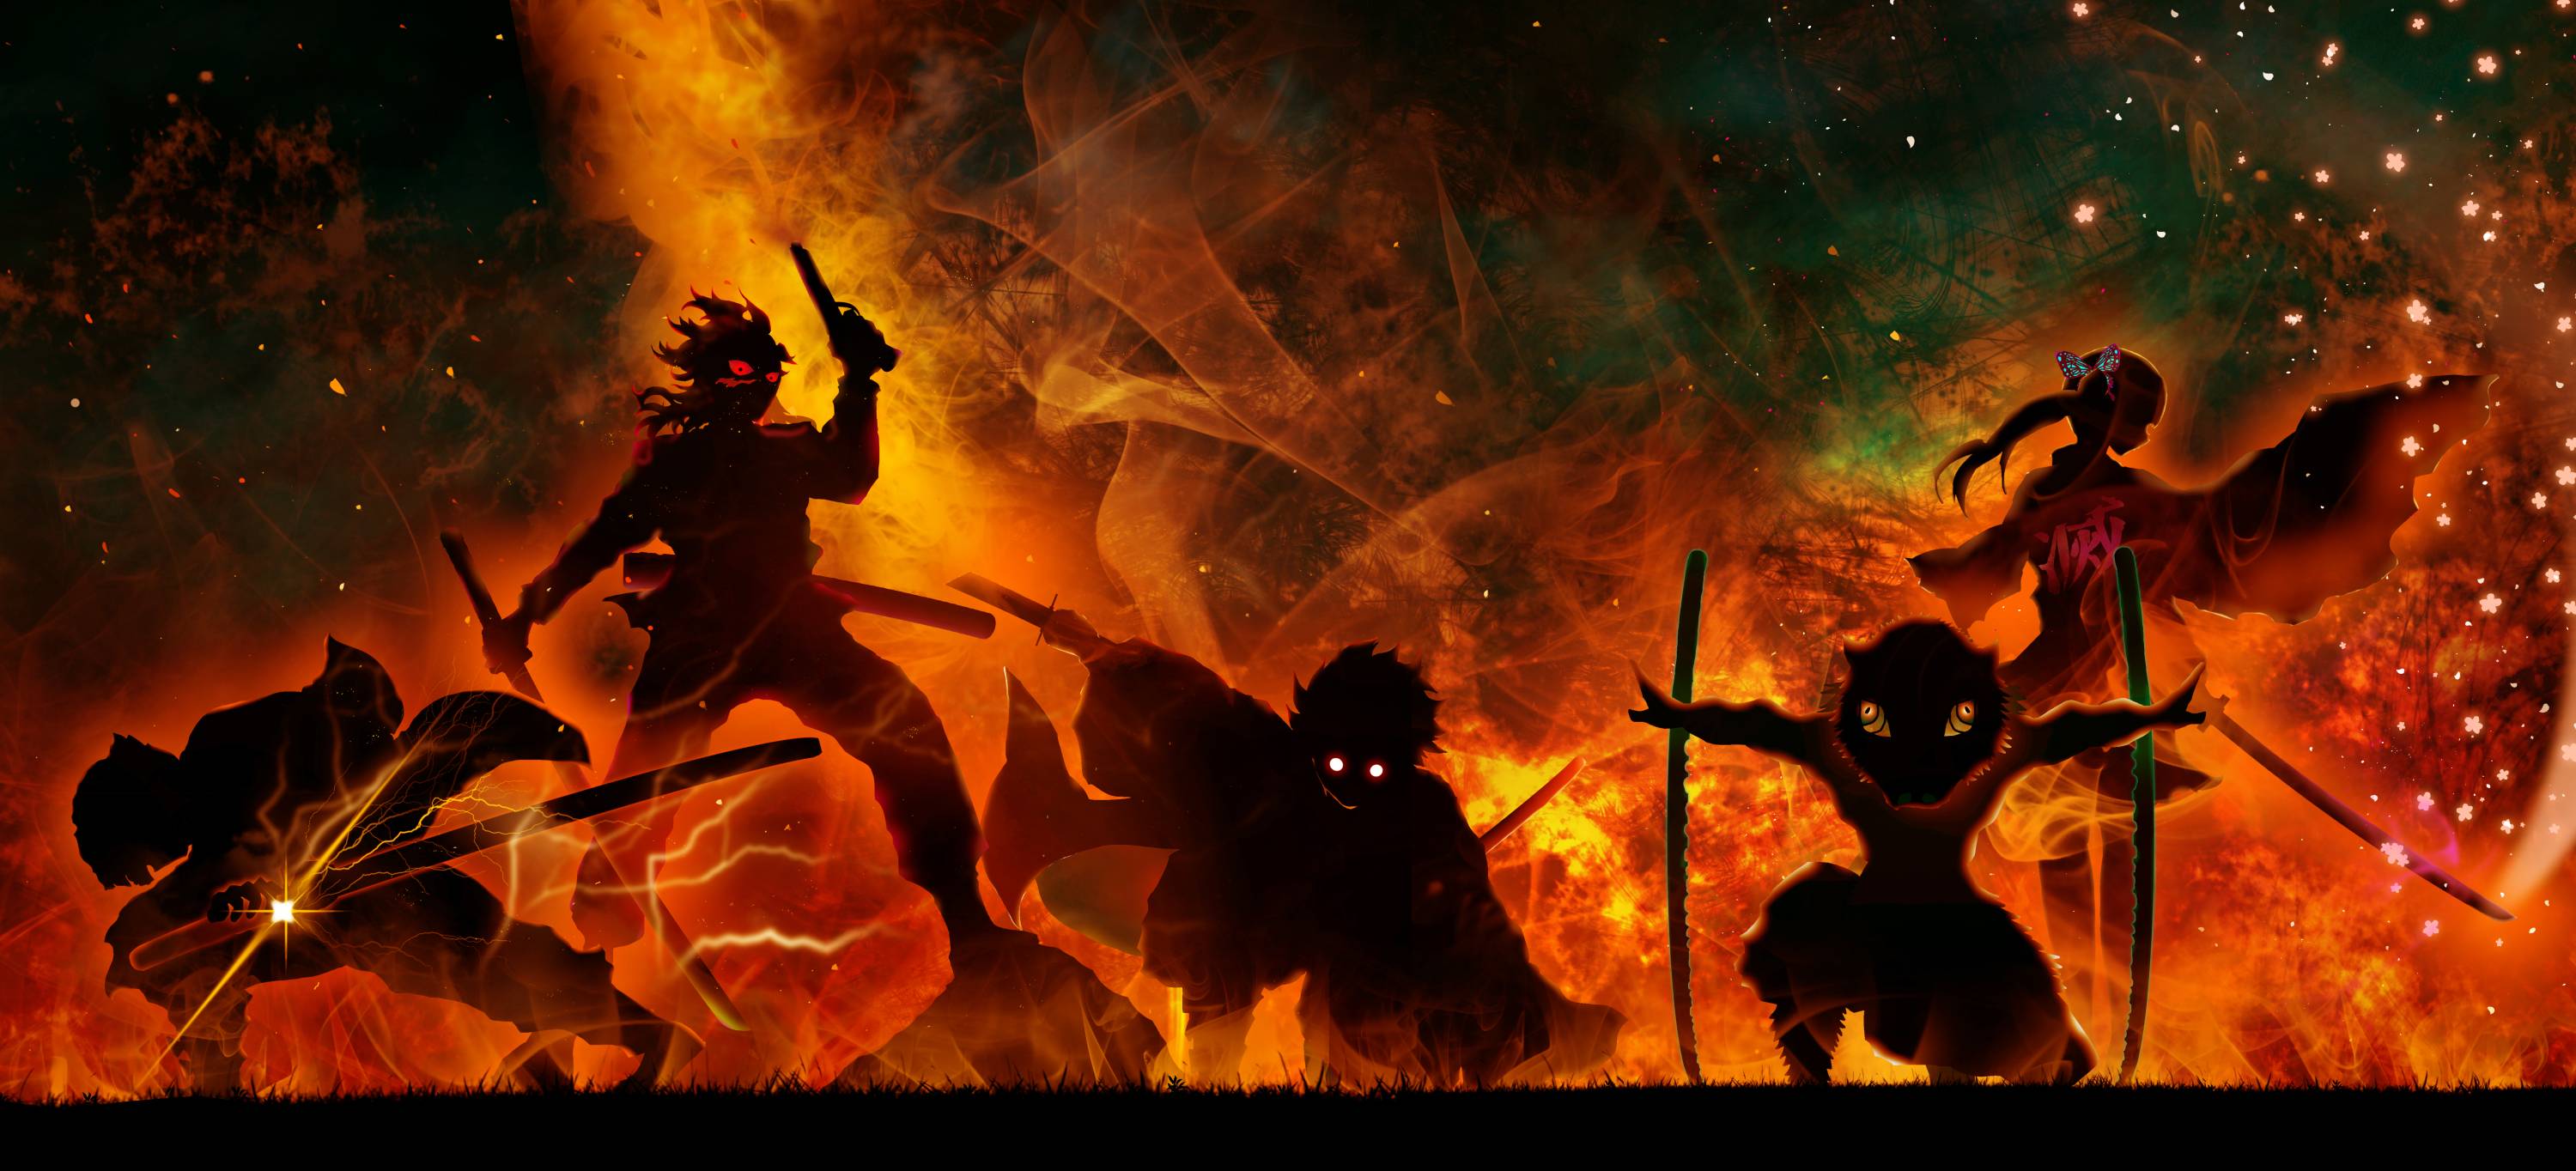 Demon Slayer Fire Wallpapers - Top Free Demon Slayer Fire Backgrounds